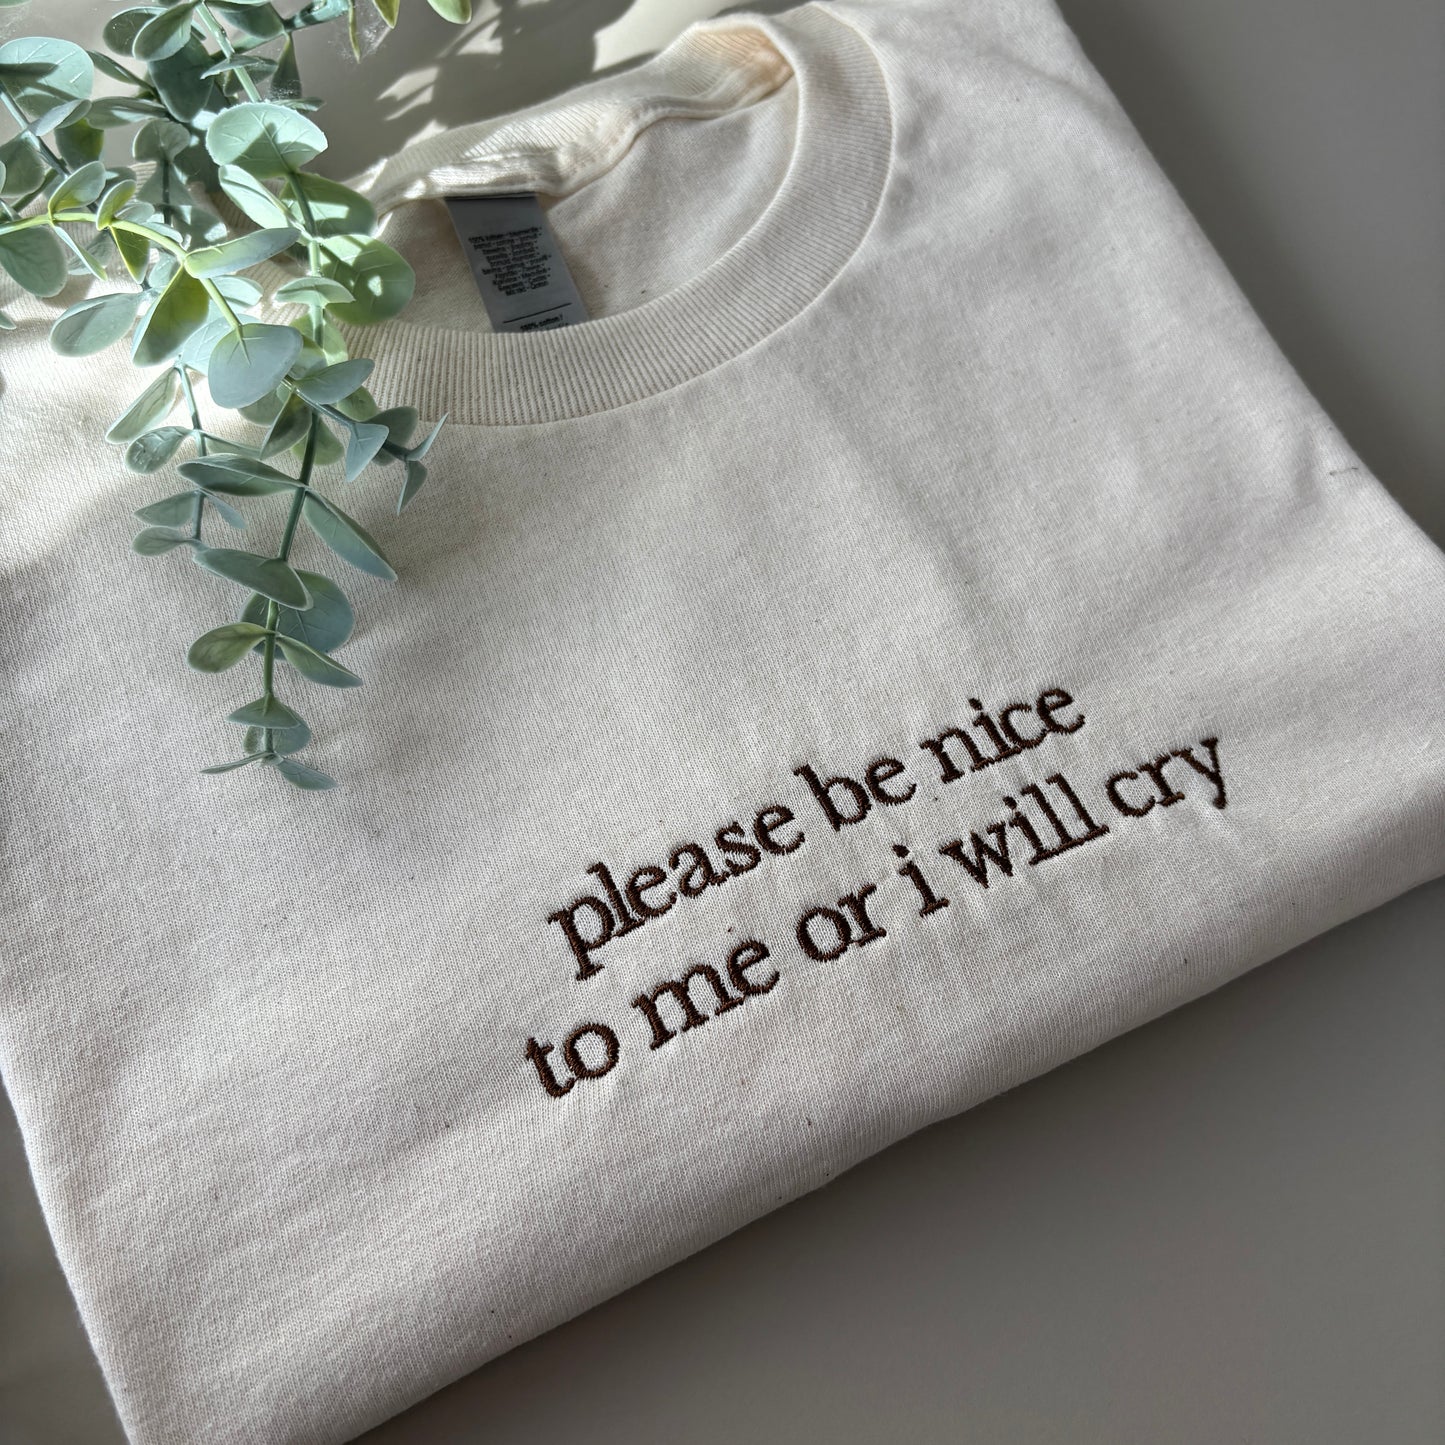 PLEASE BE NICE TO ME EMBROIDERED SWEATSHIRT